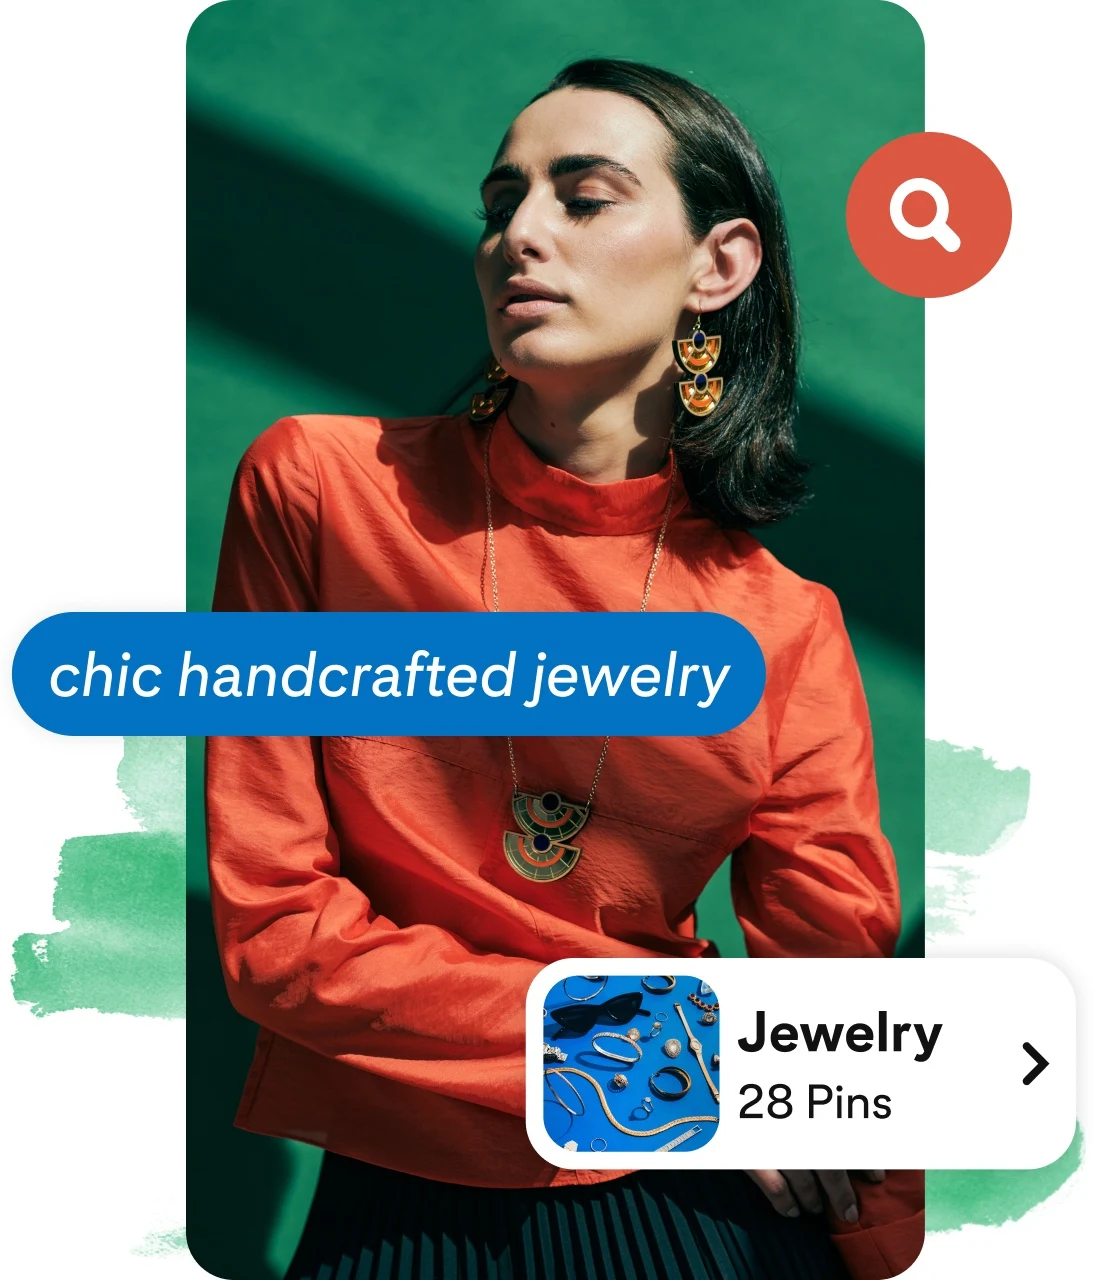 Collage woman wearing orange blouse, blue content button tag,  jewelry board link, and question mark icon